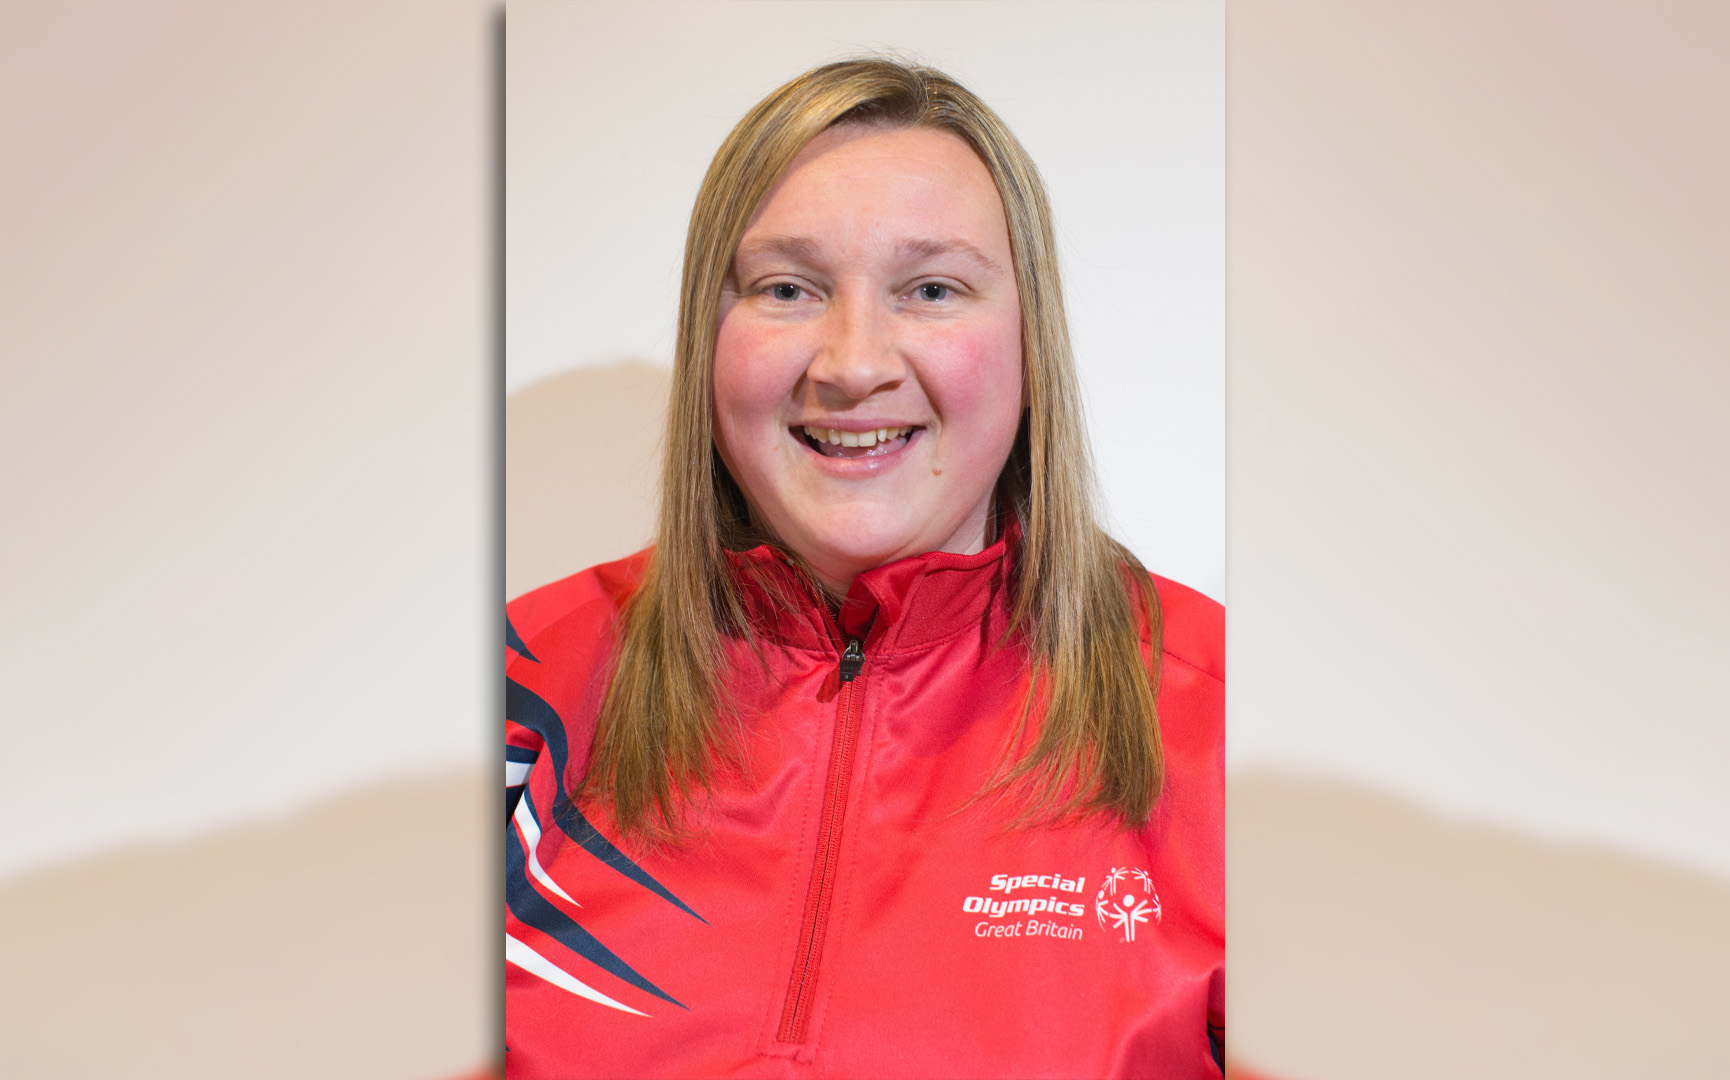 Abertay alumnus Laura Baxter recognised in New Year Honours for work with Special Olympics GB